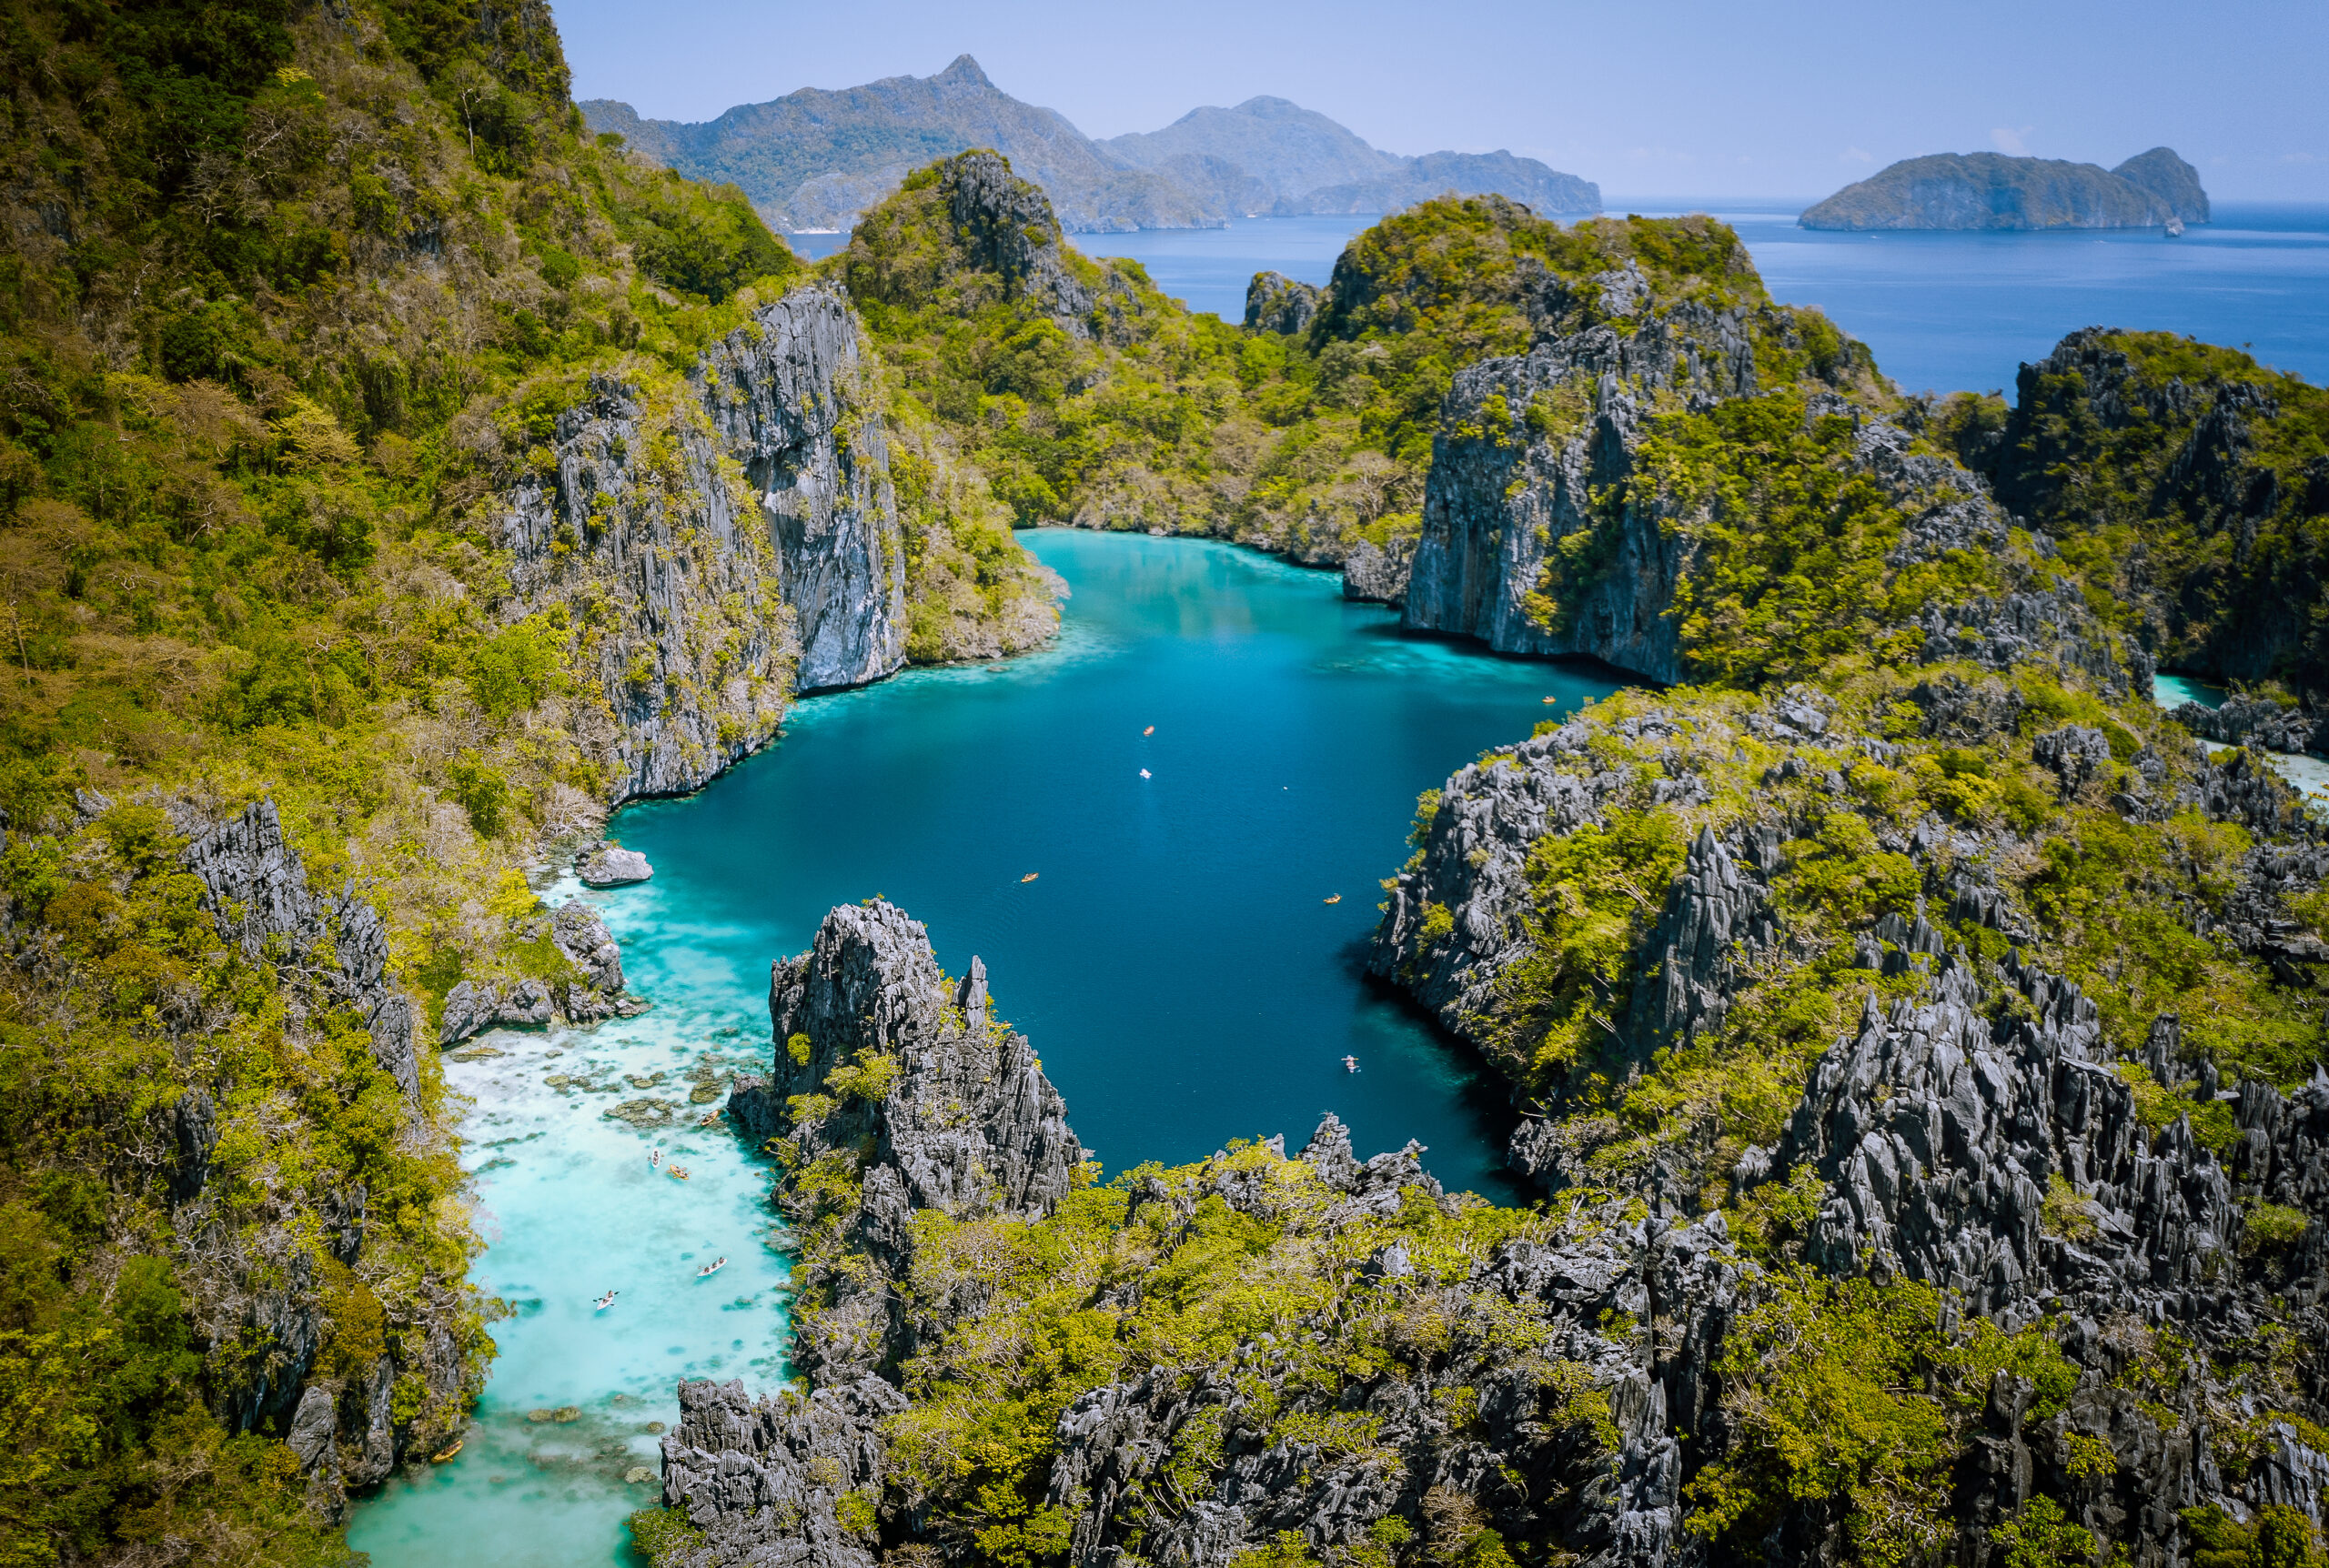 Aerial view of a turquoise lagoon surrounded by rocky cliffs and lush greenery in El Nido, Palawan.